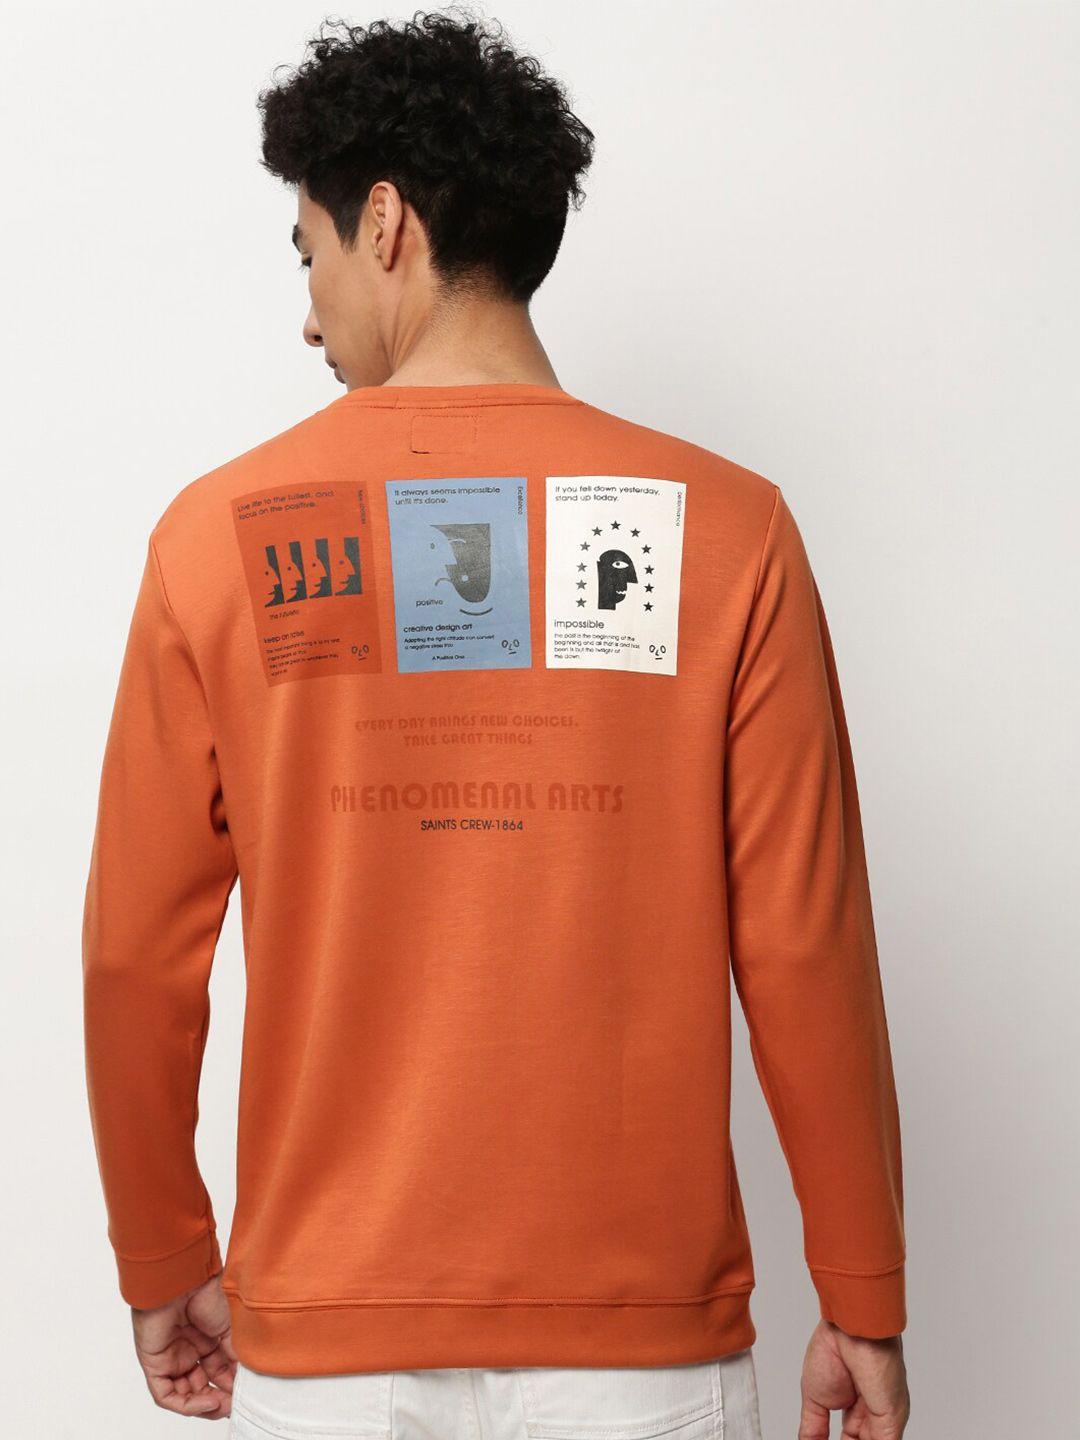 showoff typography printed cotton pullover